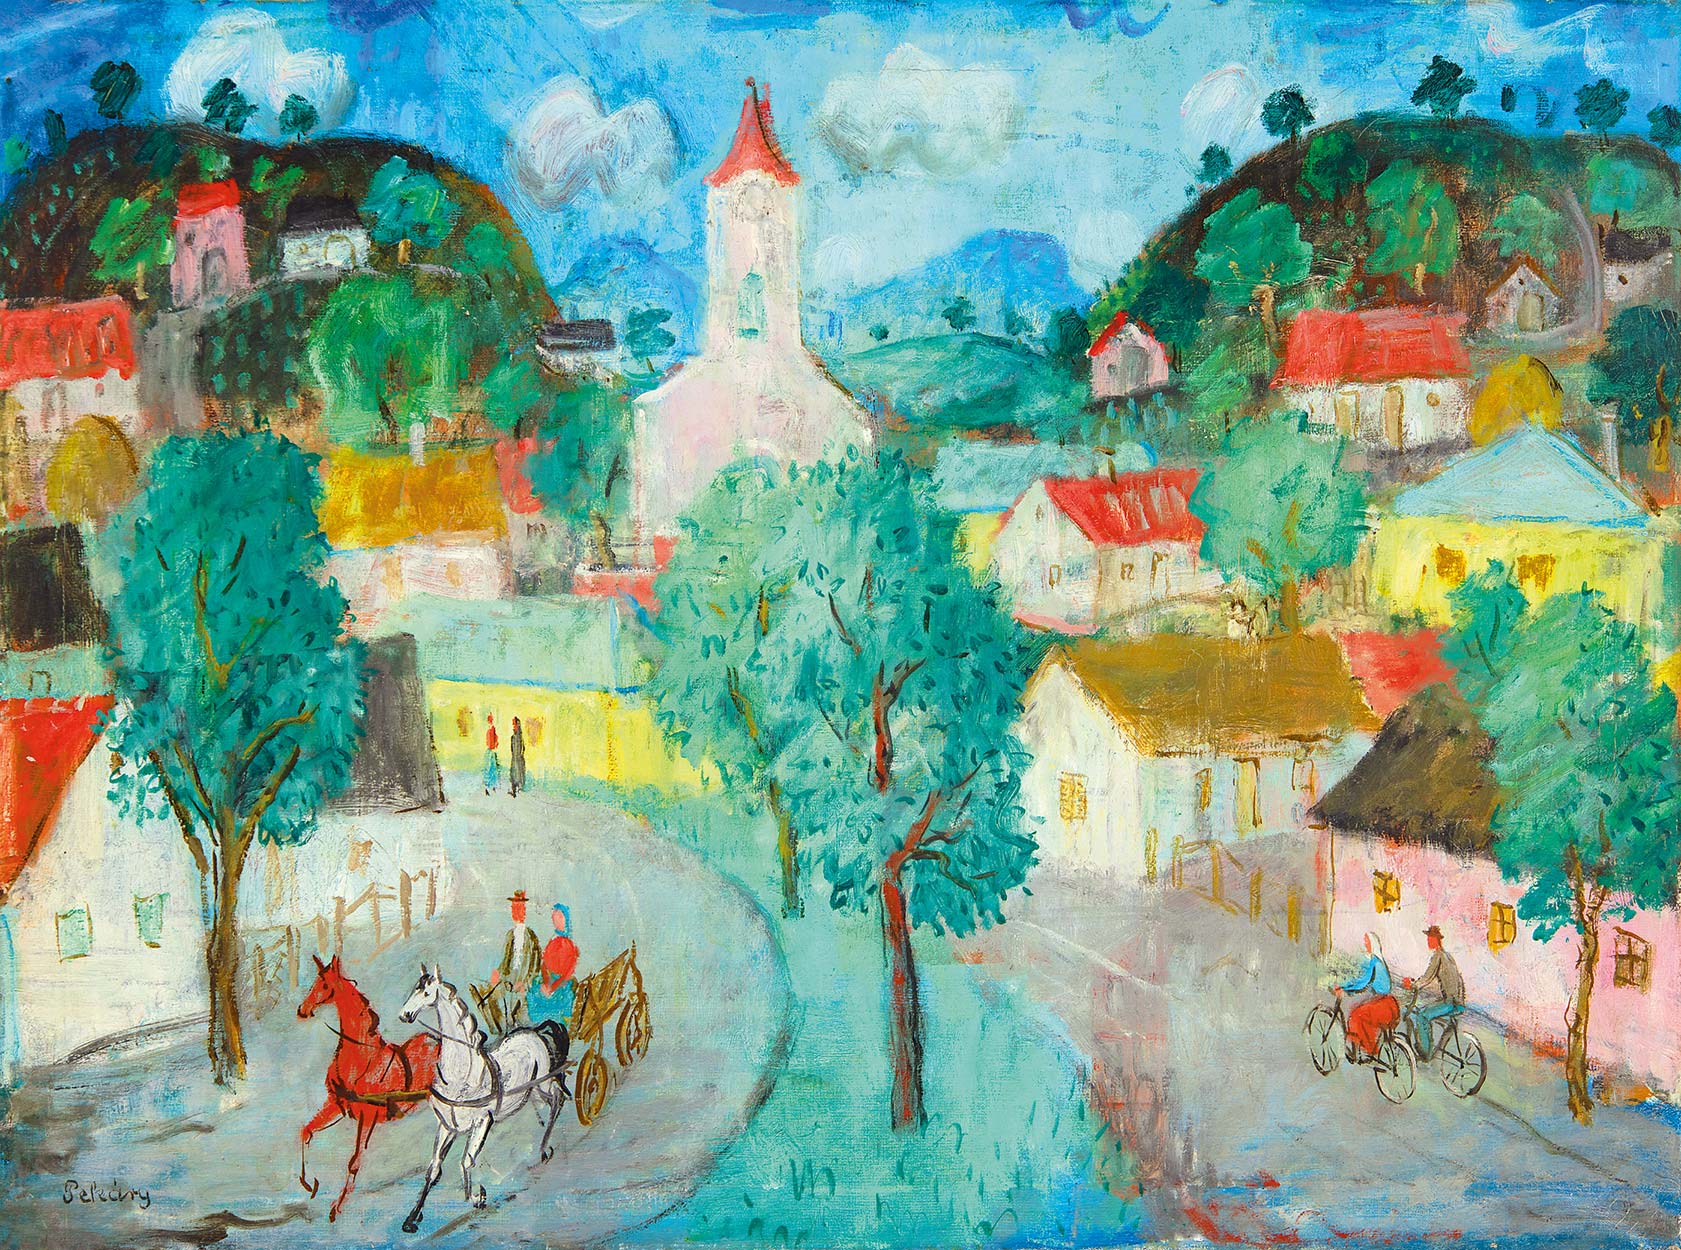 Pekáry István (1905-1981) Afternoon in a Small Town (Village), 1960s